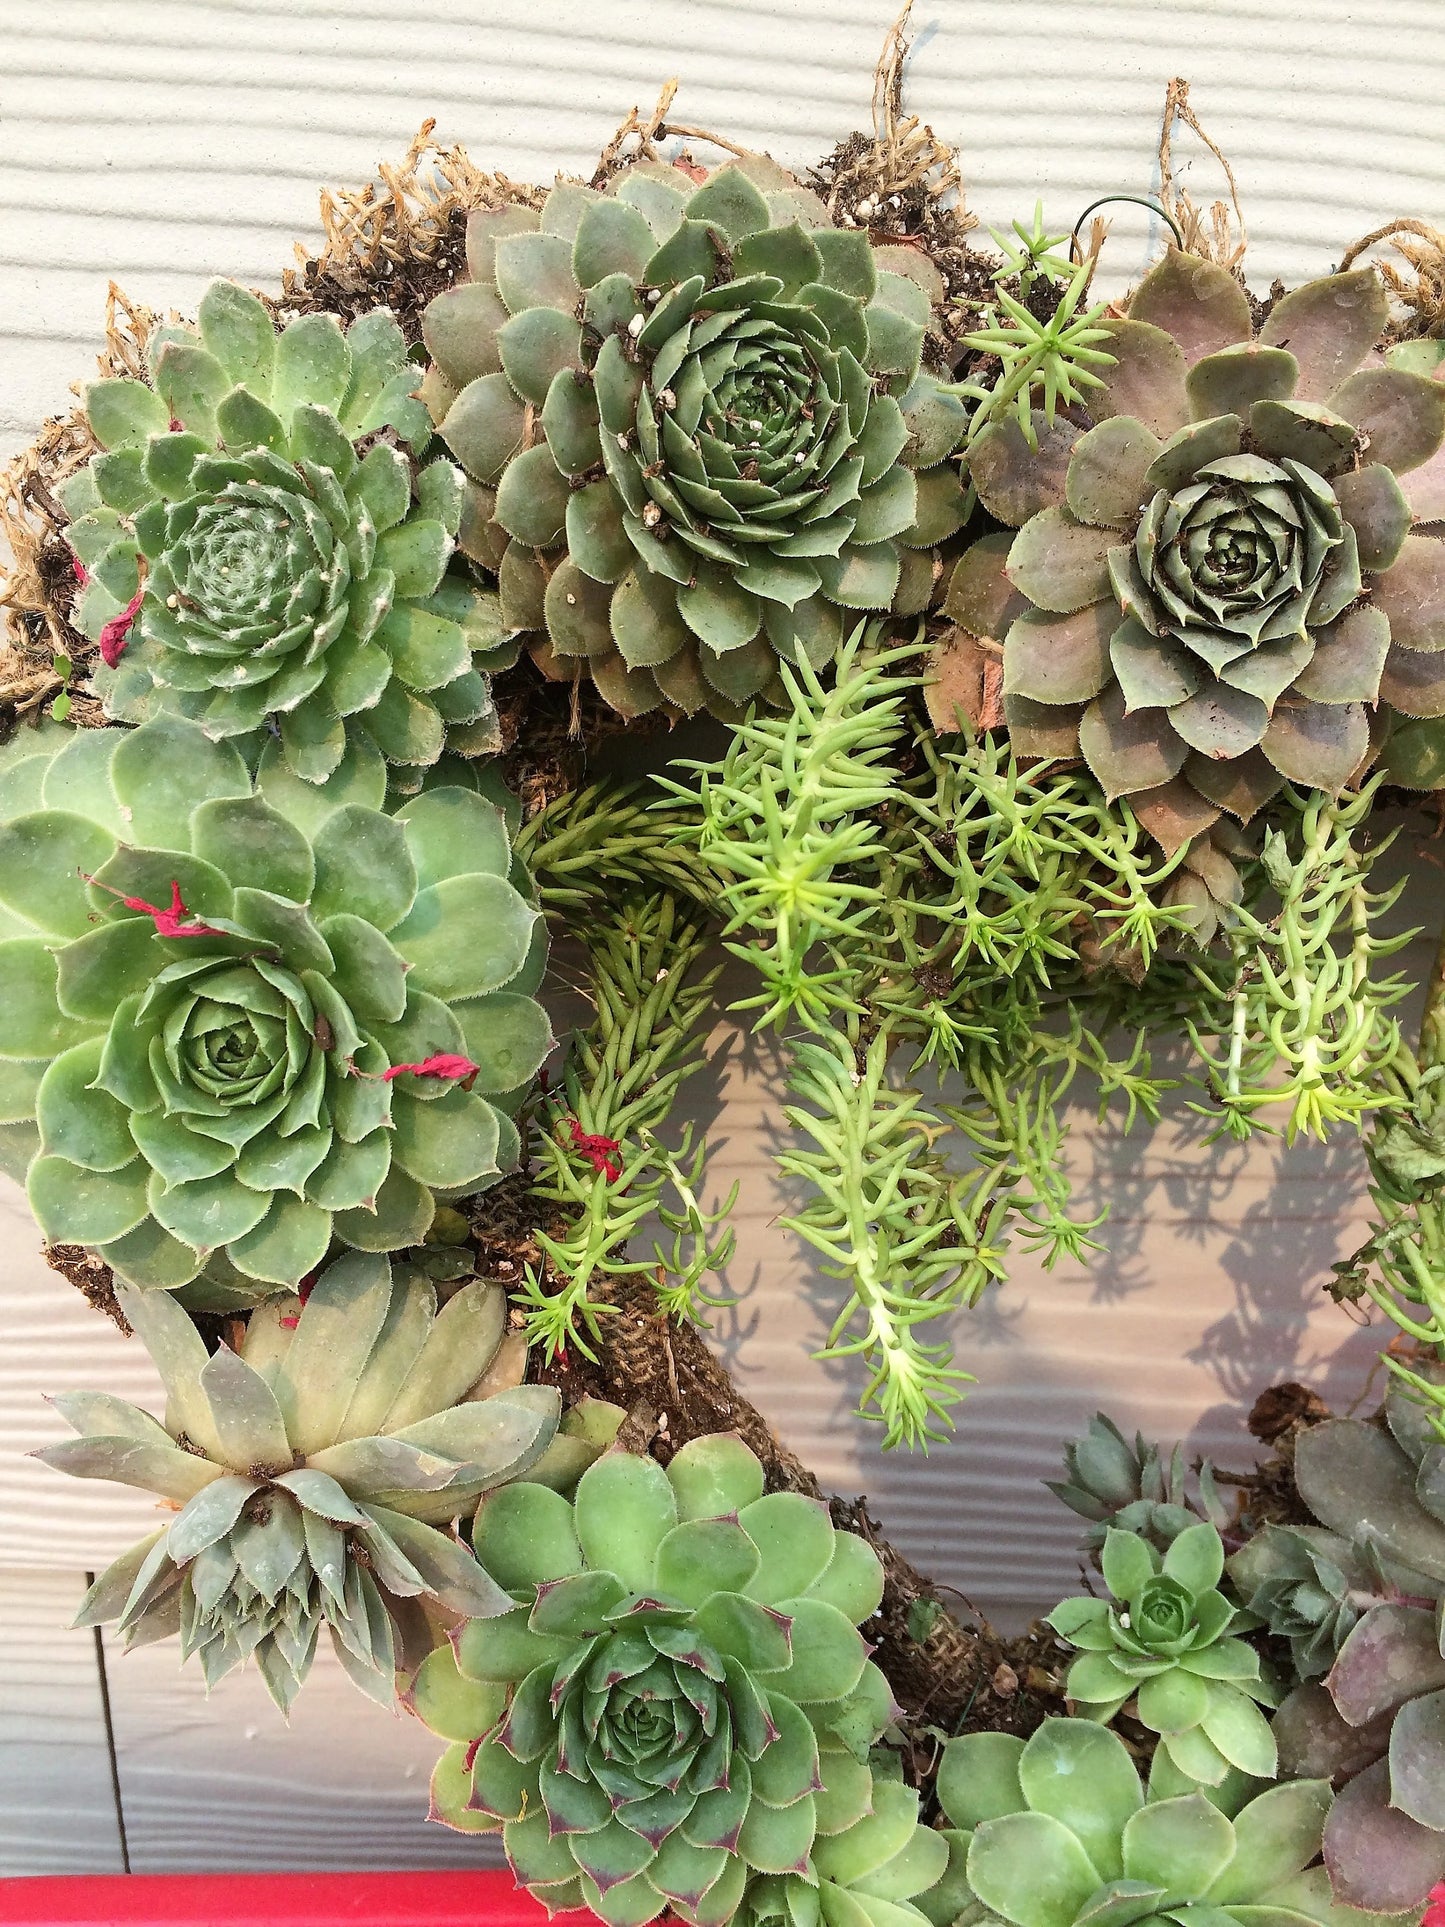 Live Succulent Valentine Heart Shaped Wreath/ Gift for a Loved One/ 13" Wide Wreath